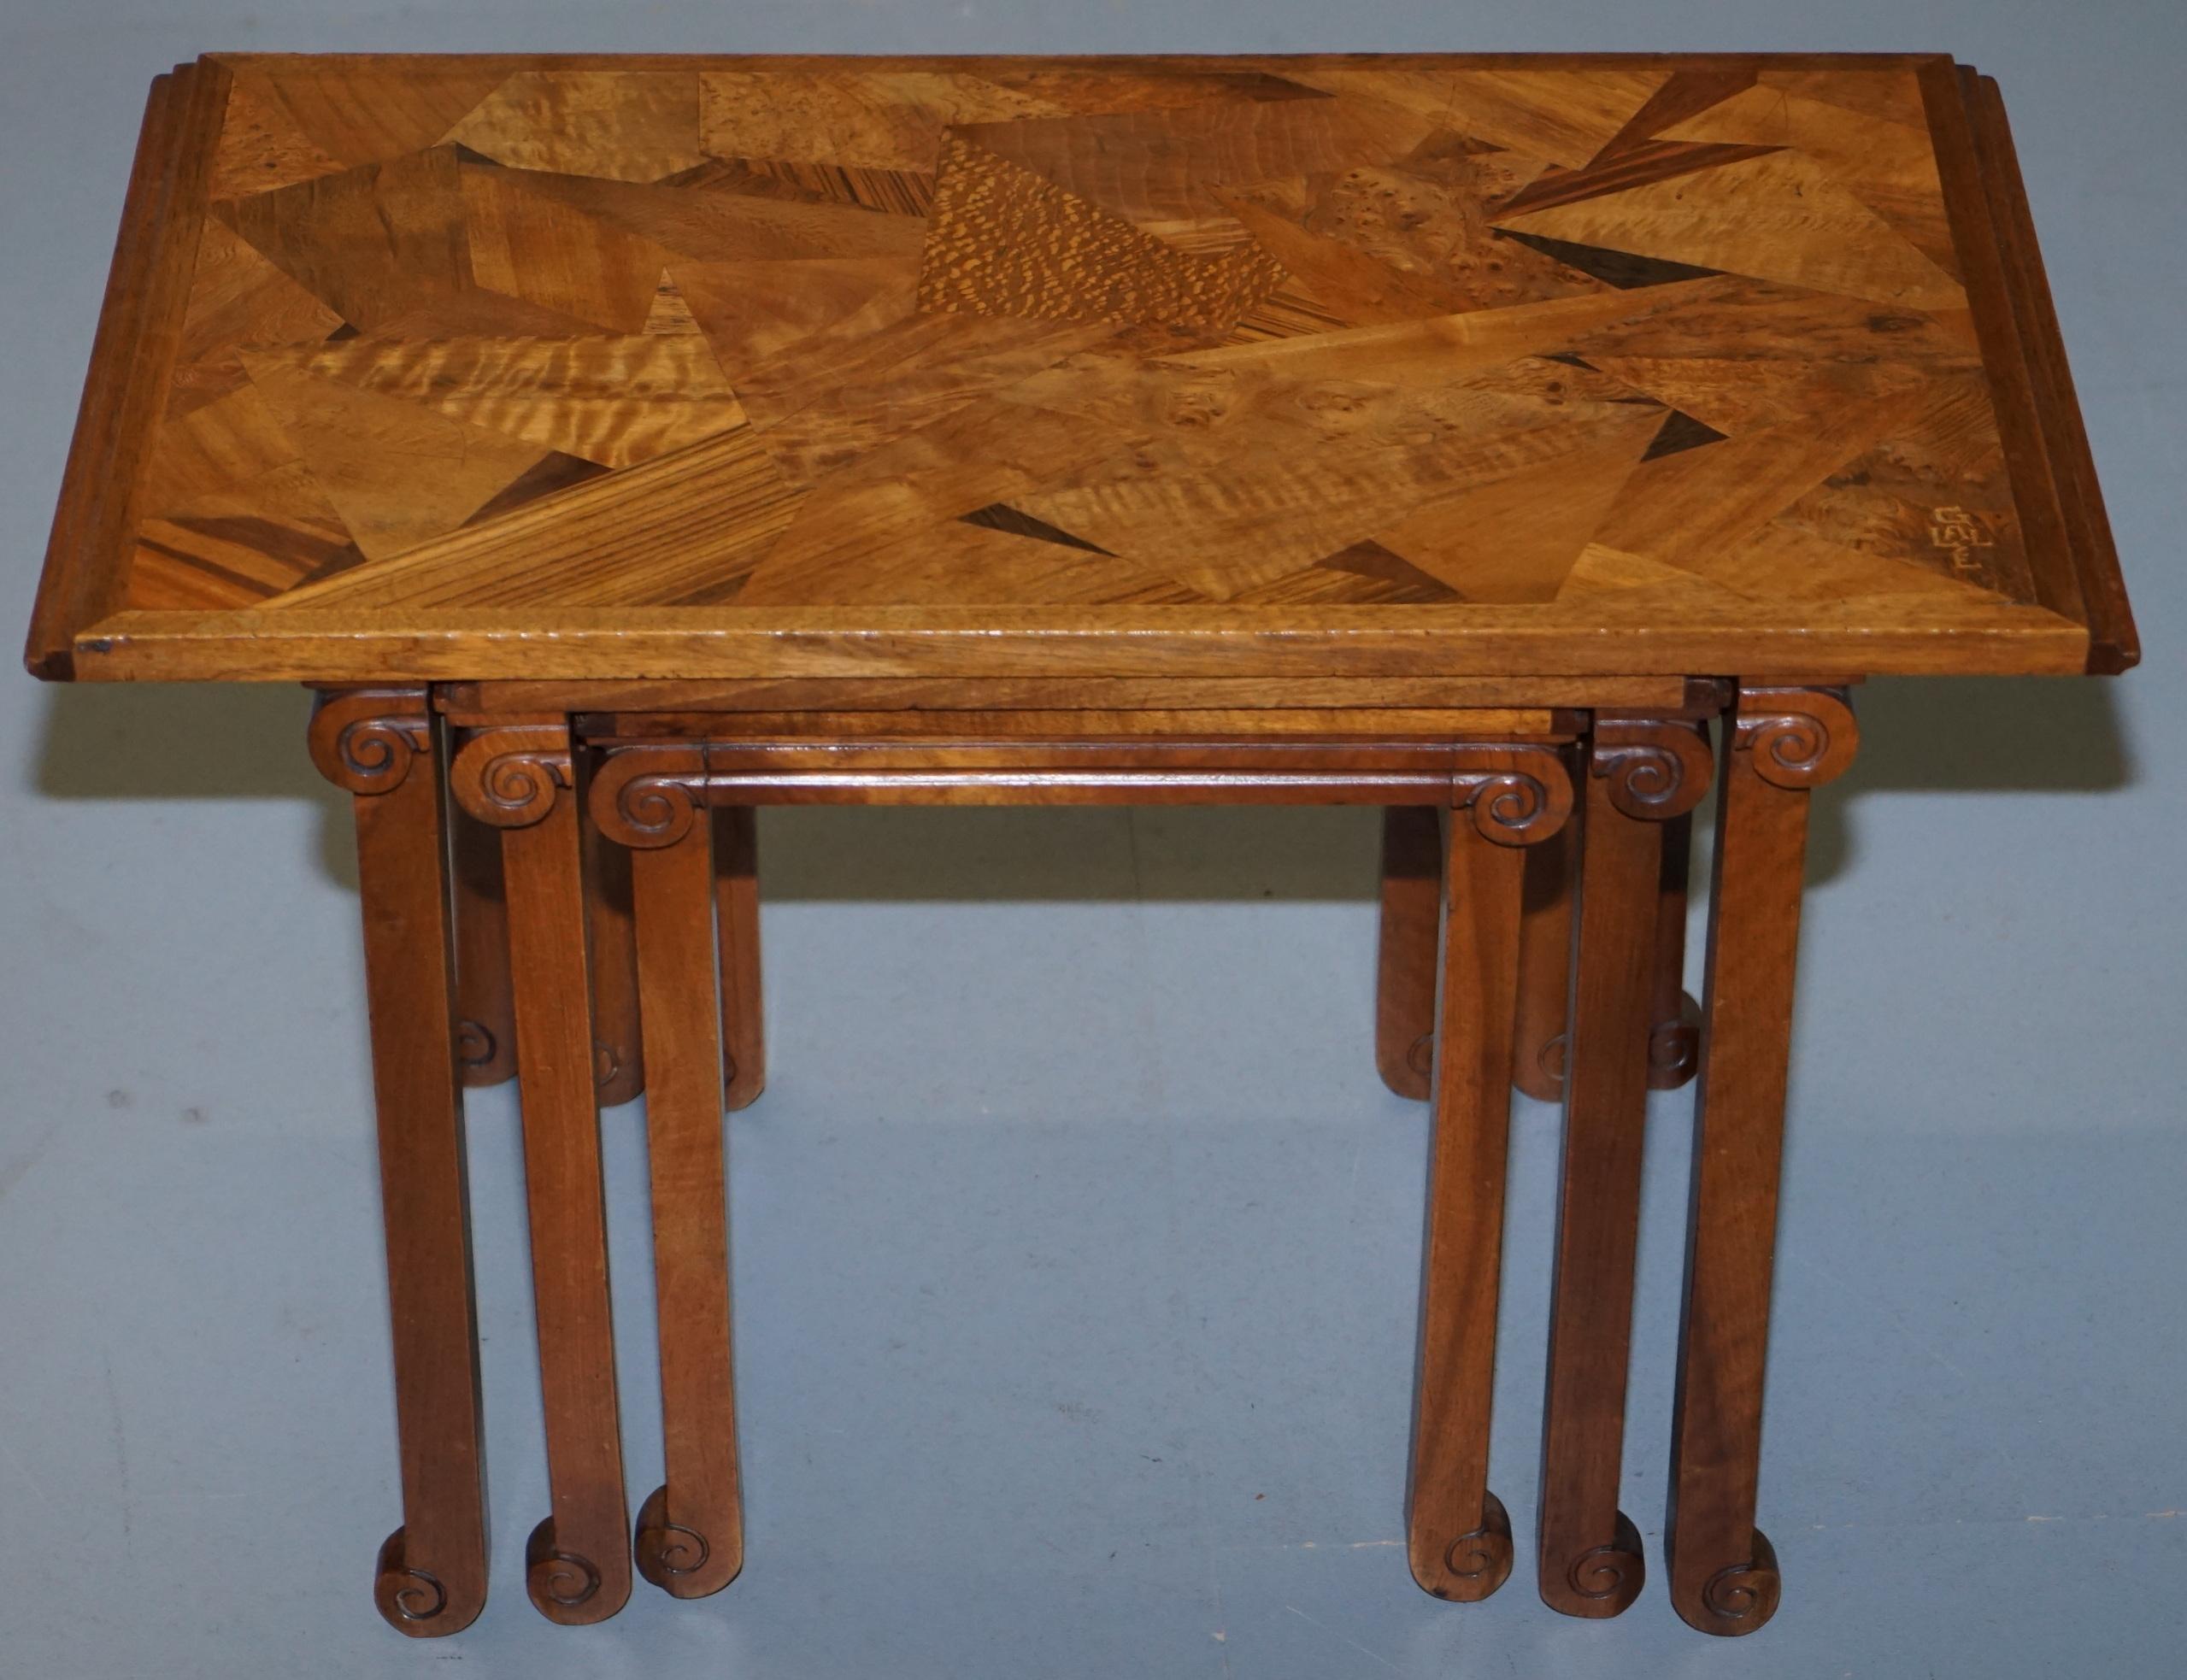 French Extremely Rare Nest of Emile Galle circa 1900 Specimen Wood Tables Art Nouveau For Sale